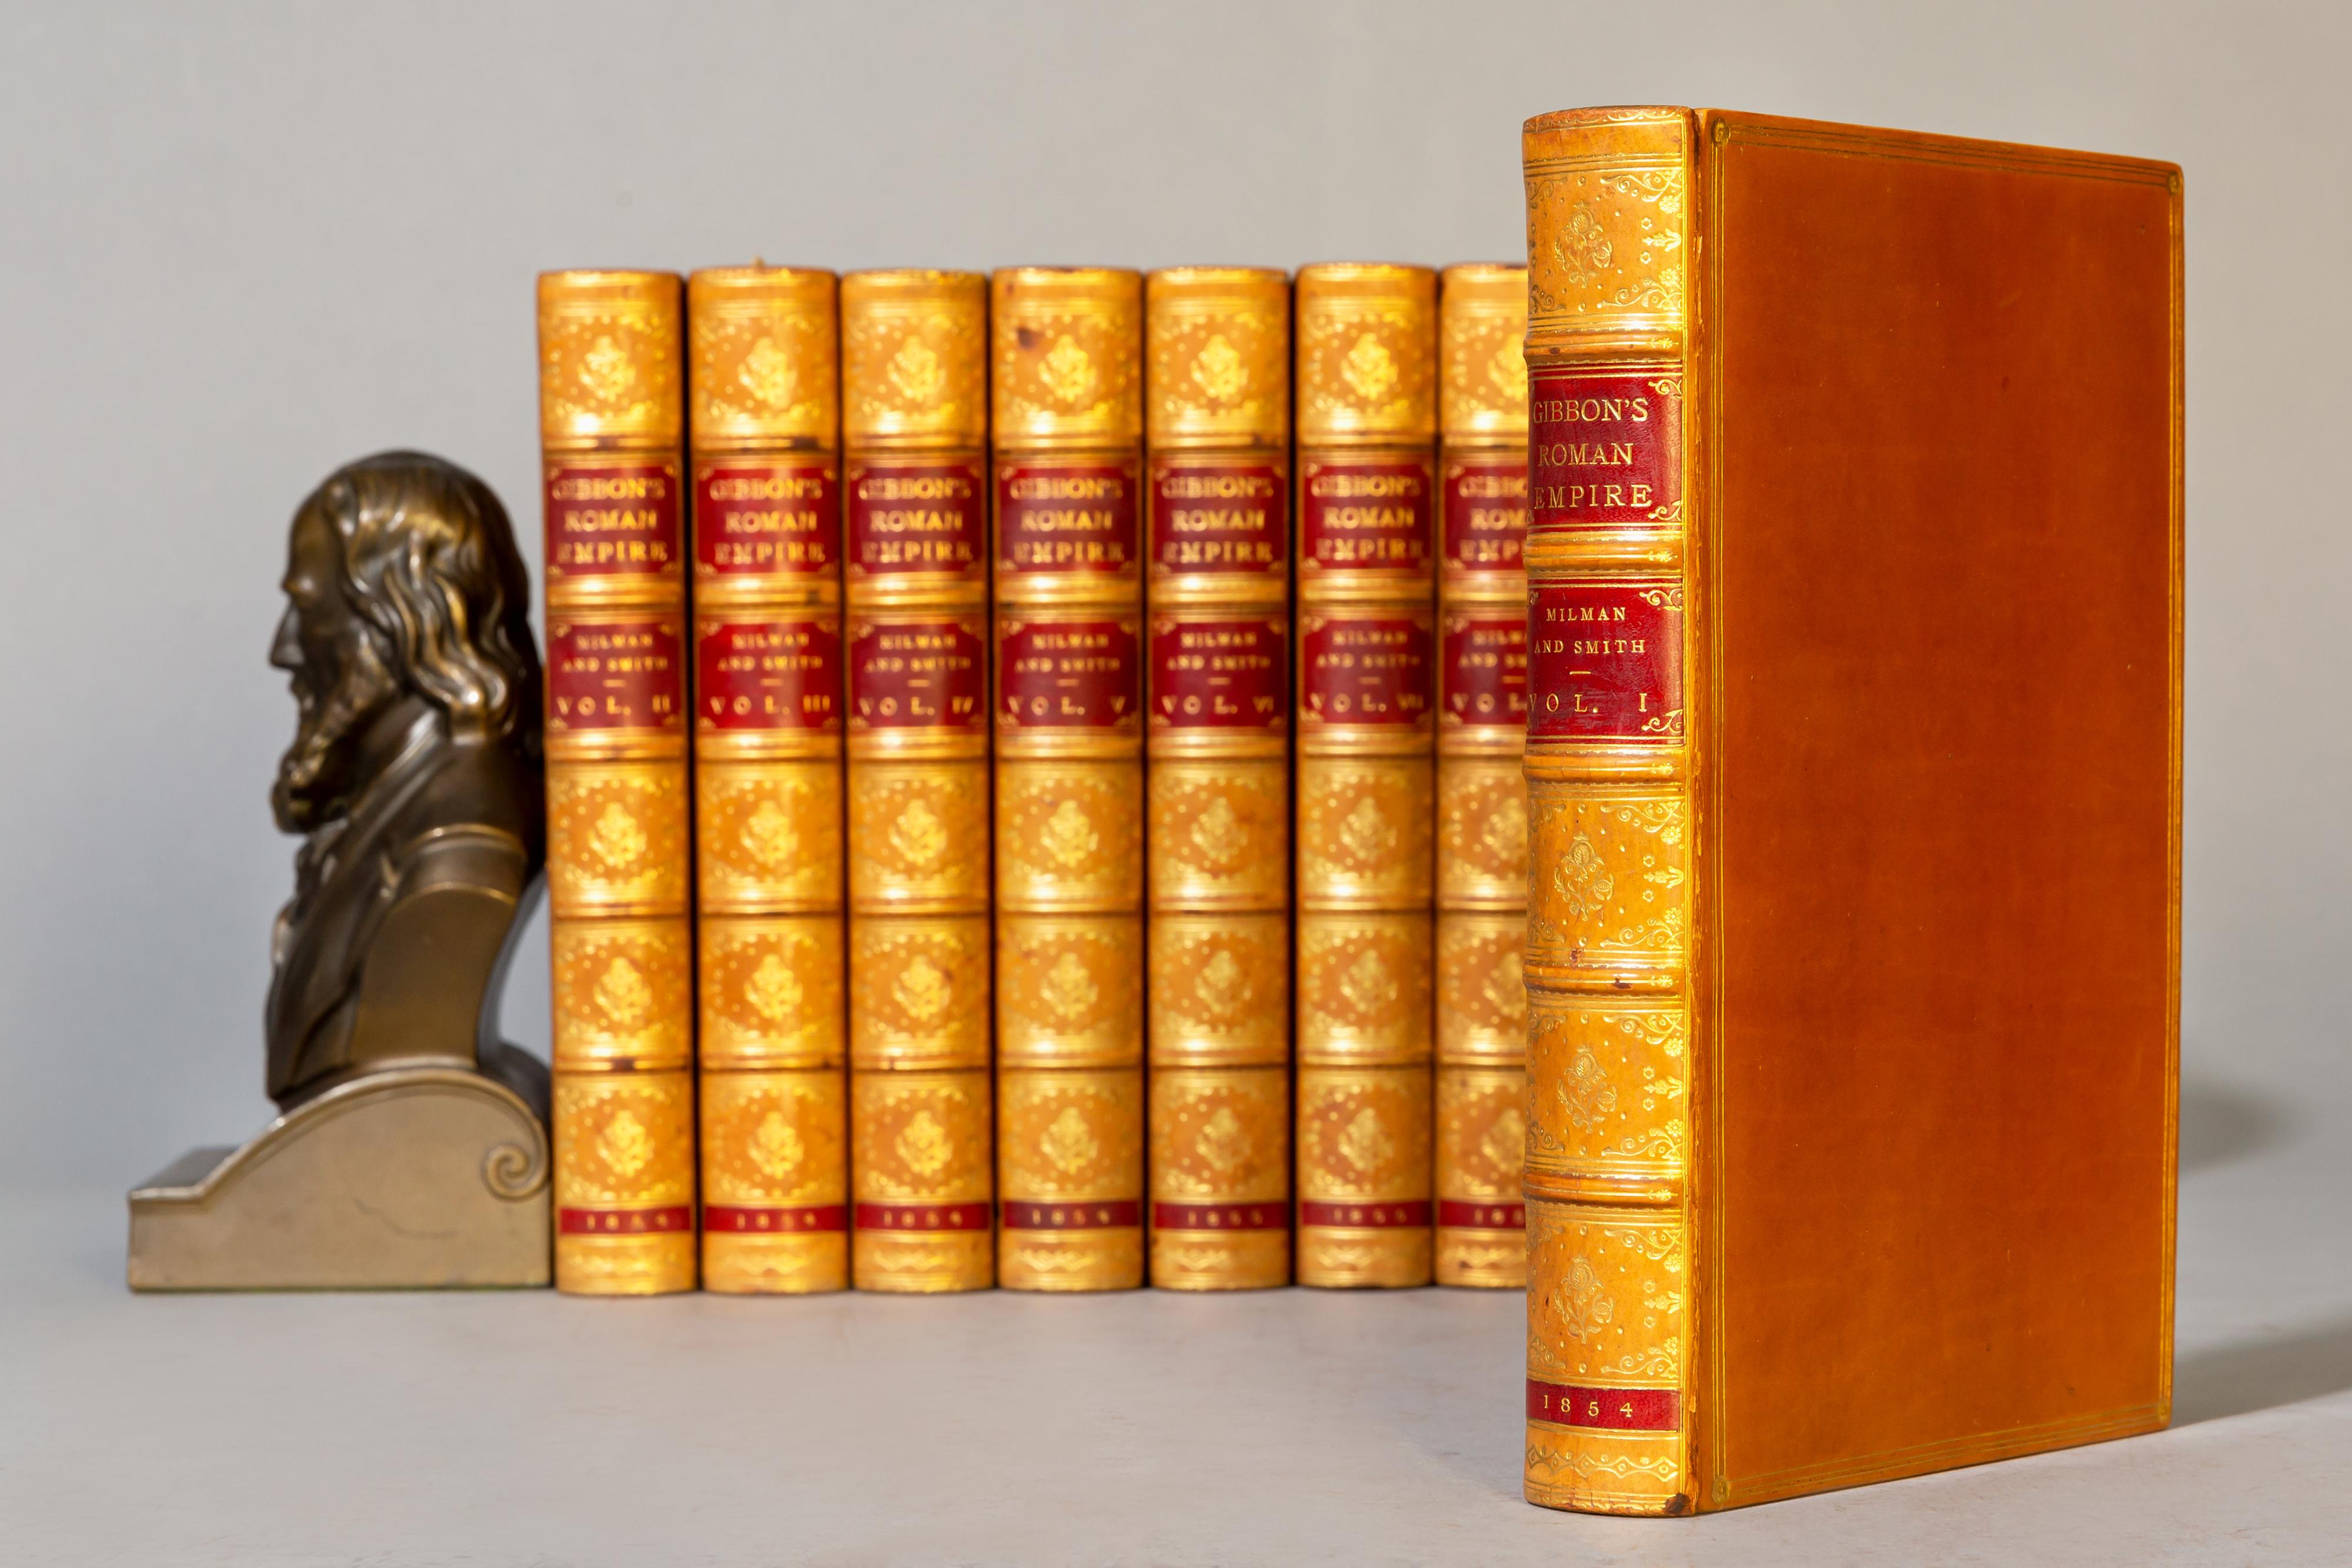 8 volumes. 

Edward Gibbon. The History of The Decline and Fall of The Roman Empire.
With notes by Dean Milman and M.Guizot. Edited with additional notes by William Smith.
With portrait and Maps. Bound in full polished calf by Root and Son, top